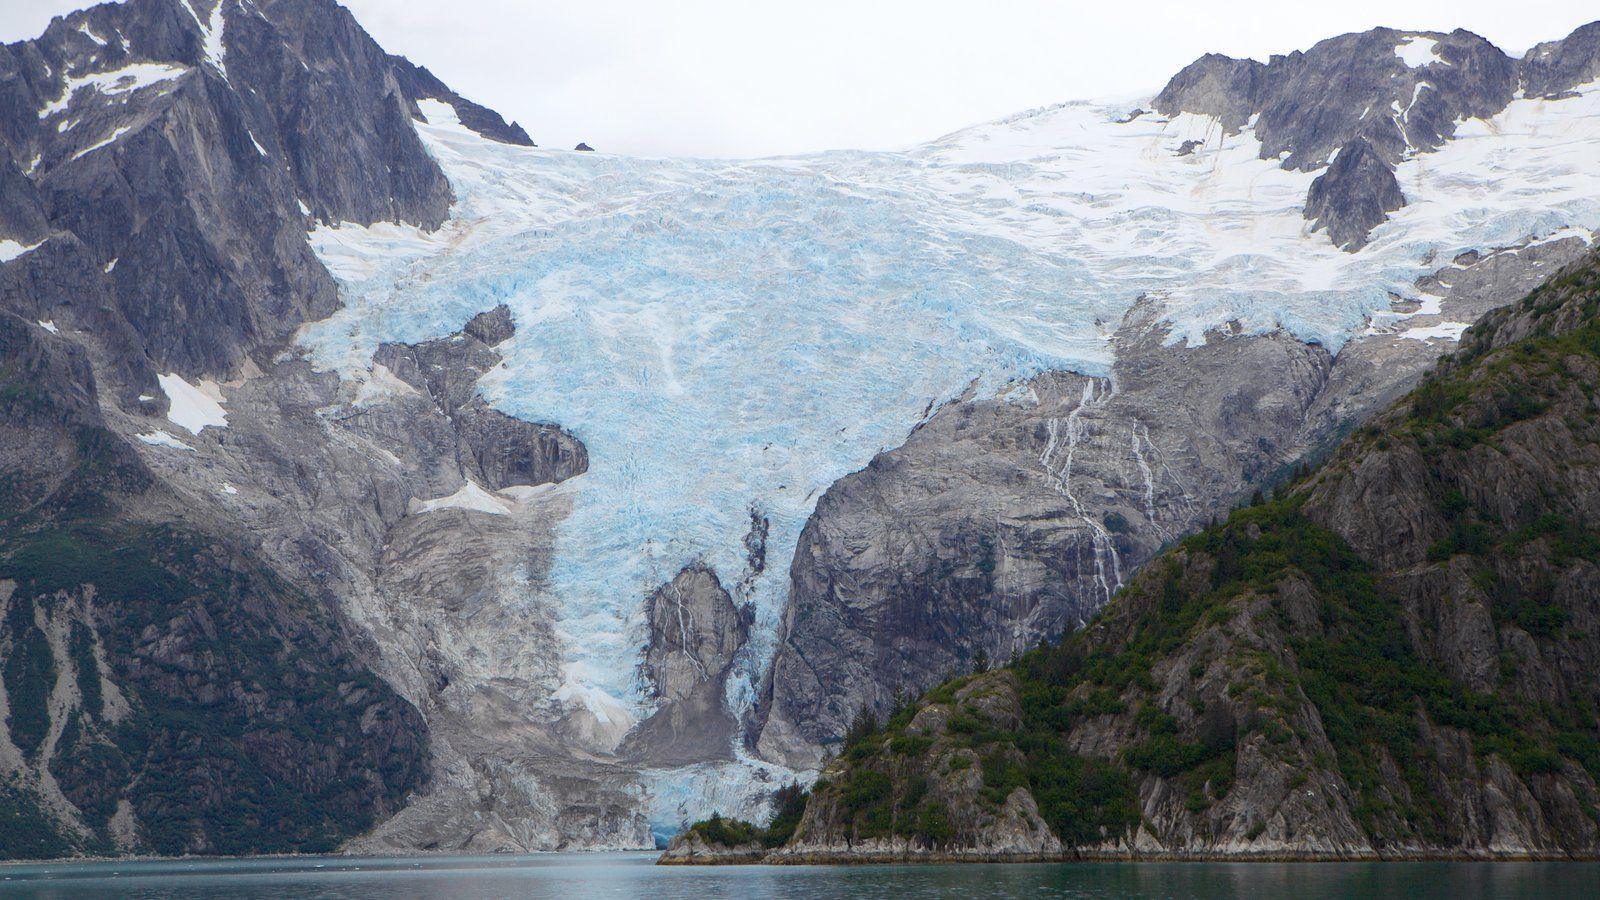 Winter Picture: View Image of Kenai Fjords National Park